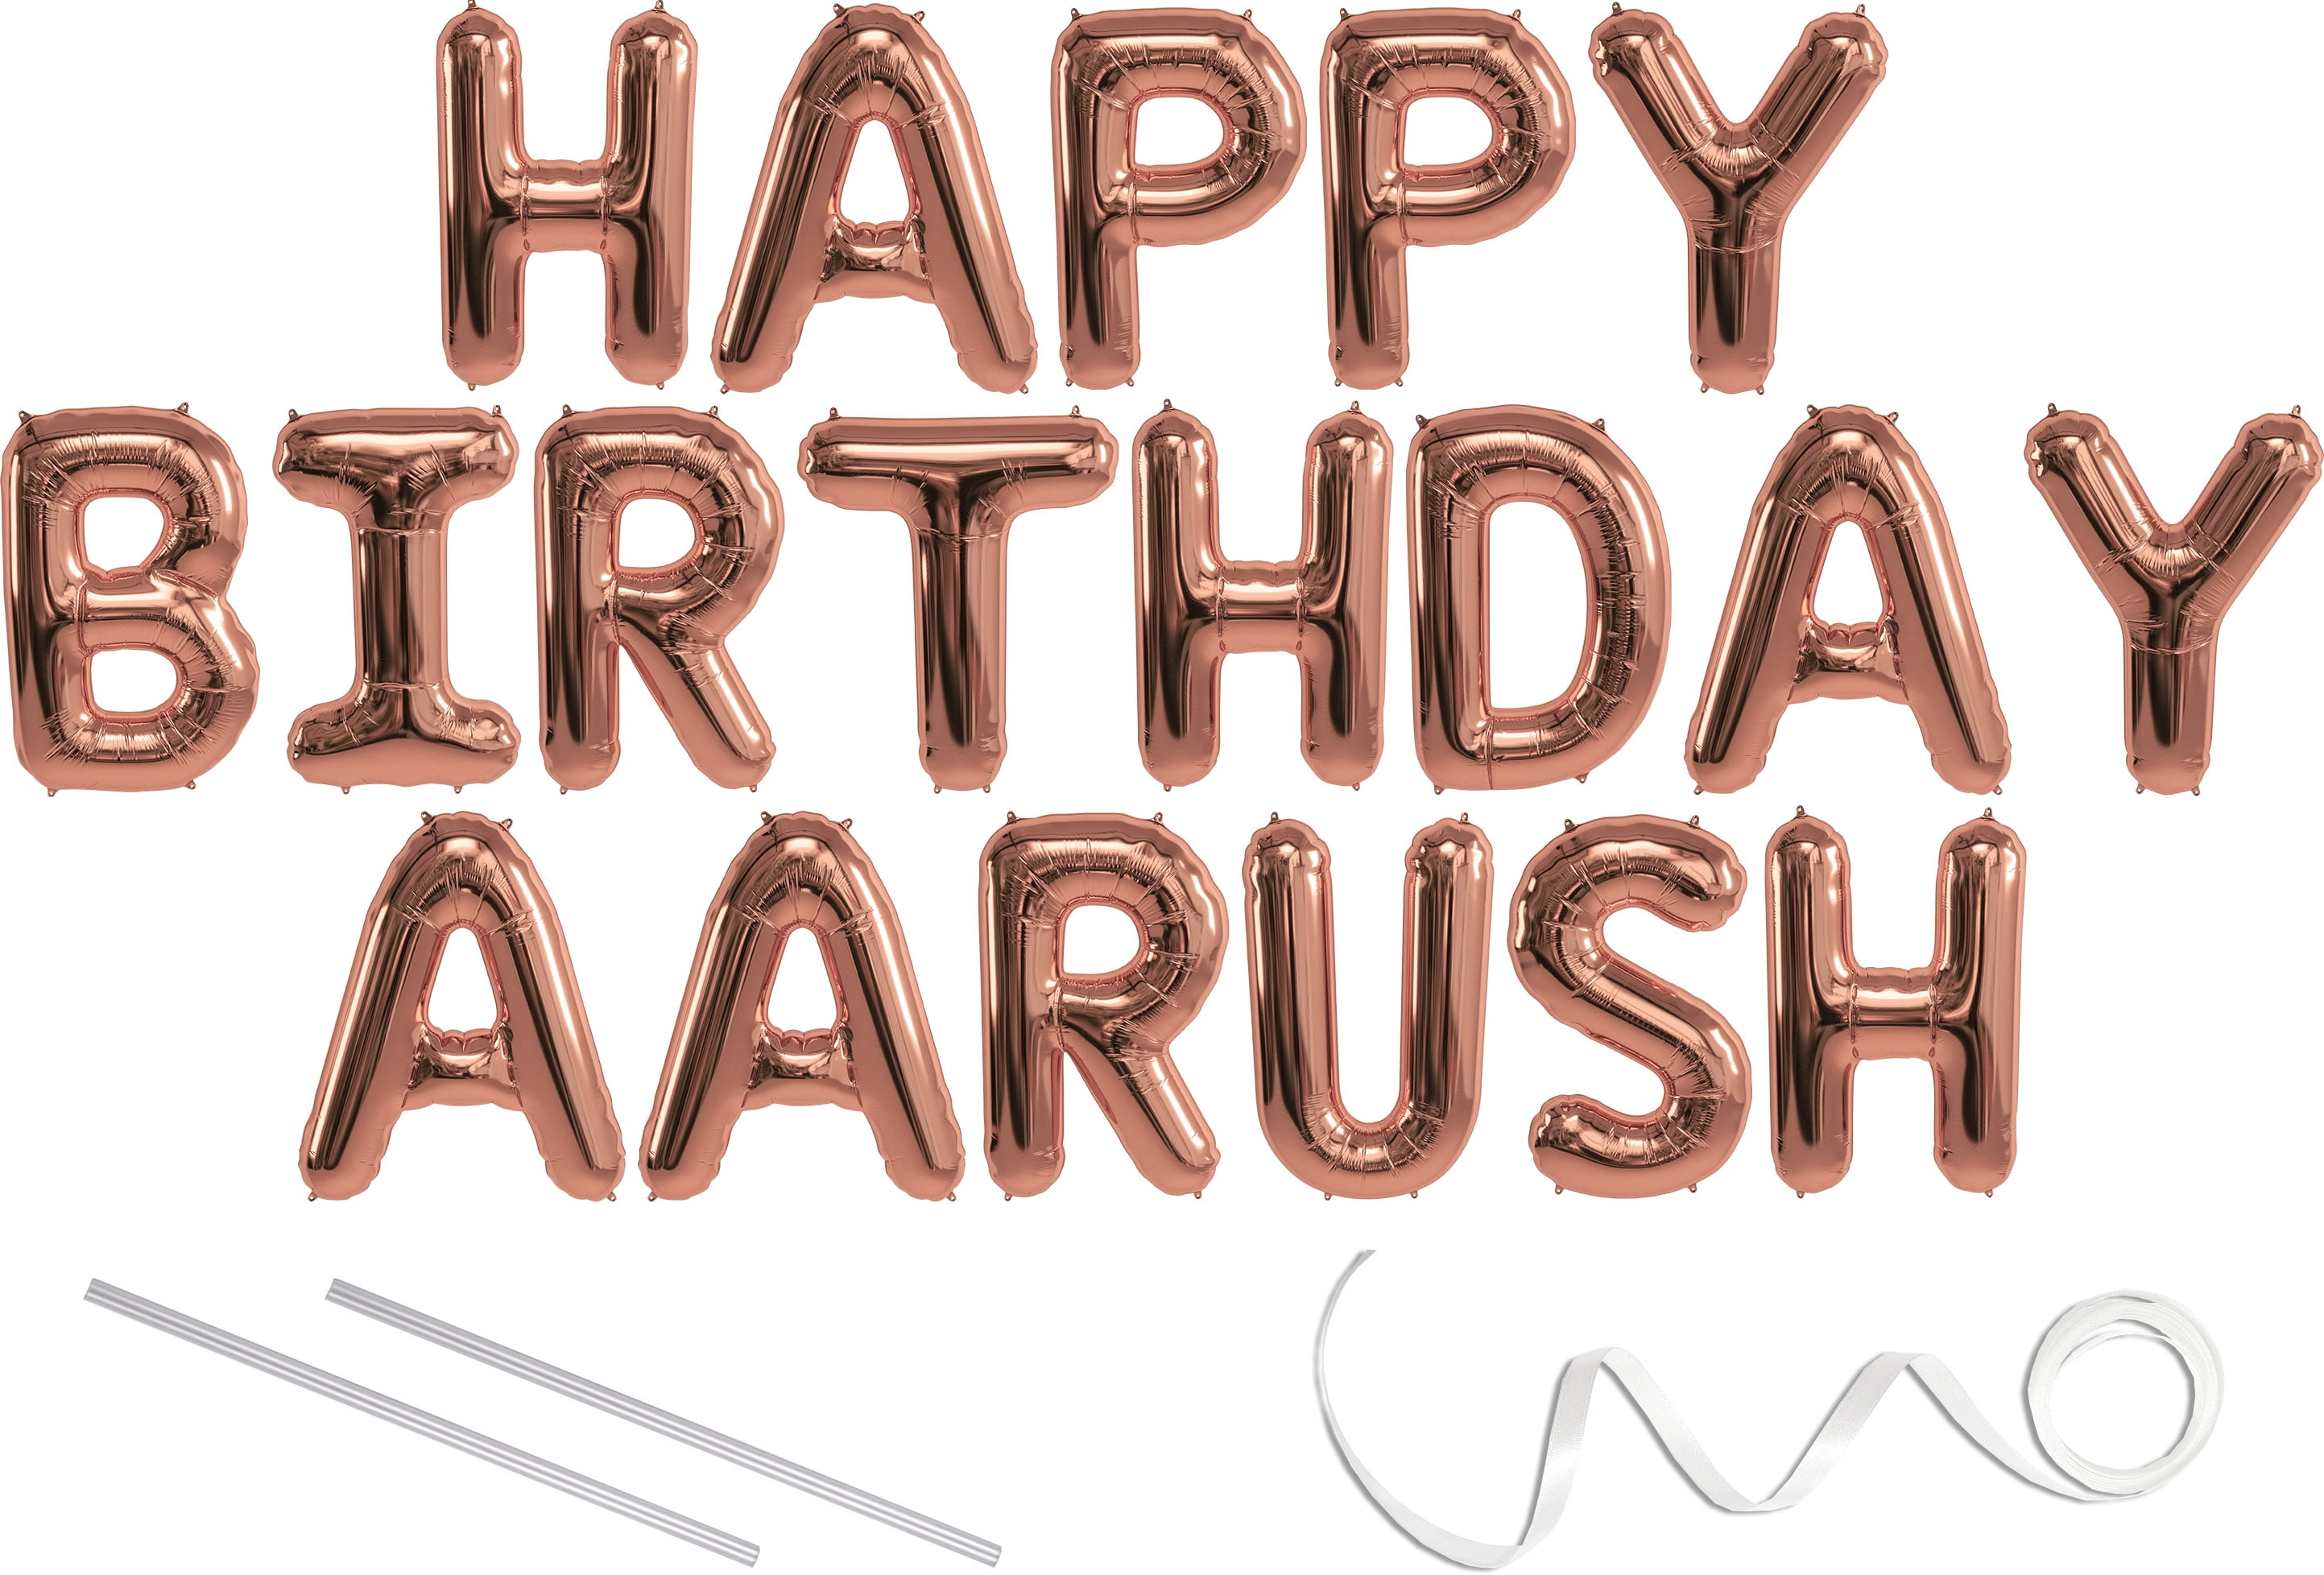 Aarush, Happy Birthday Mylar Balloon Banner - Rose Gold - 16 inch Letters.  Includes 2 Straws for Inflating, String for Hanging. Air Fill Only- Does  Not Float w/Helium. Great Birthday Decoration 